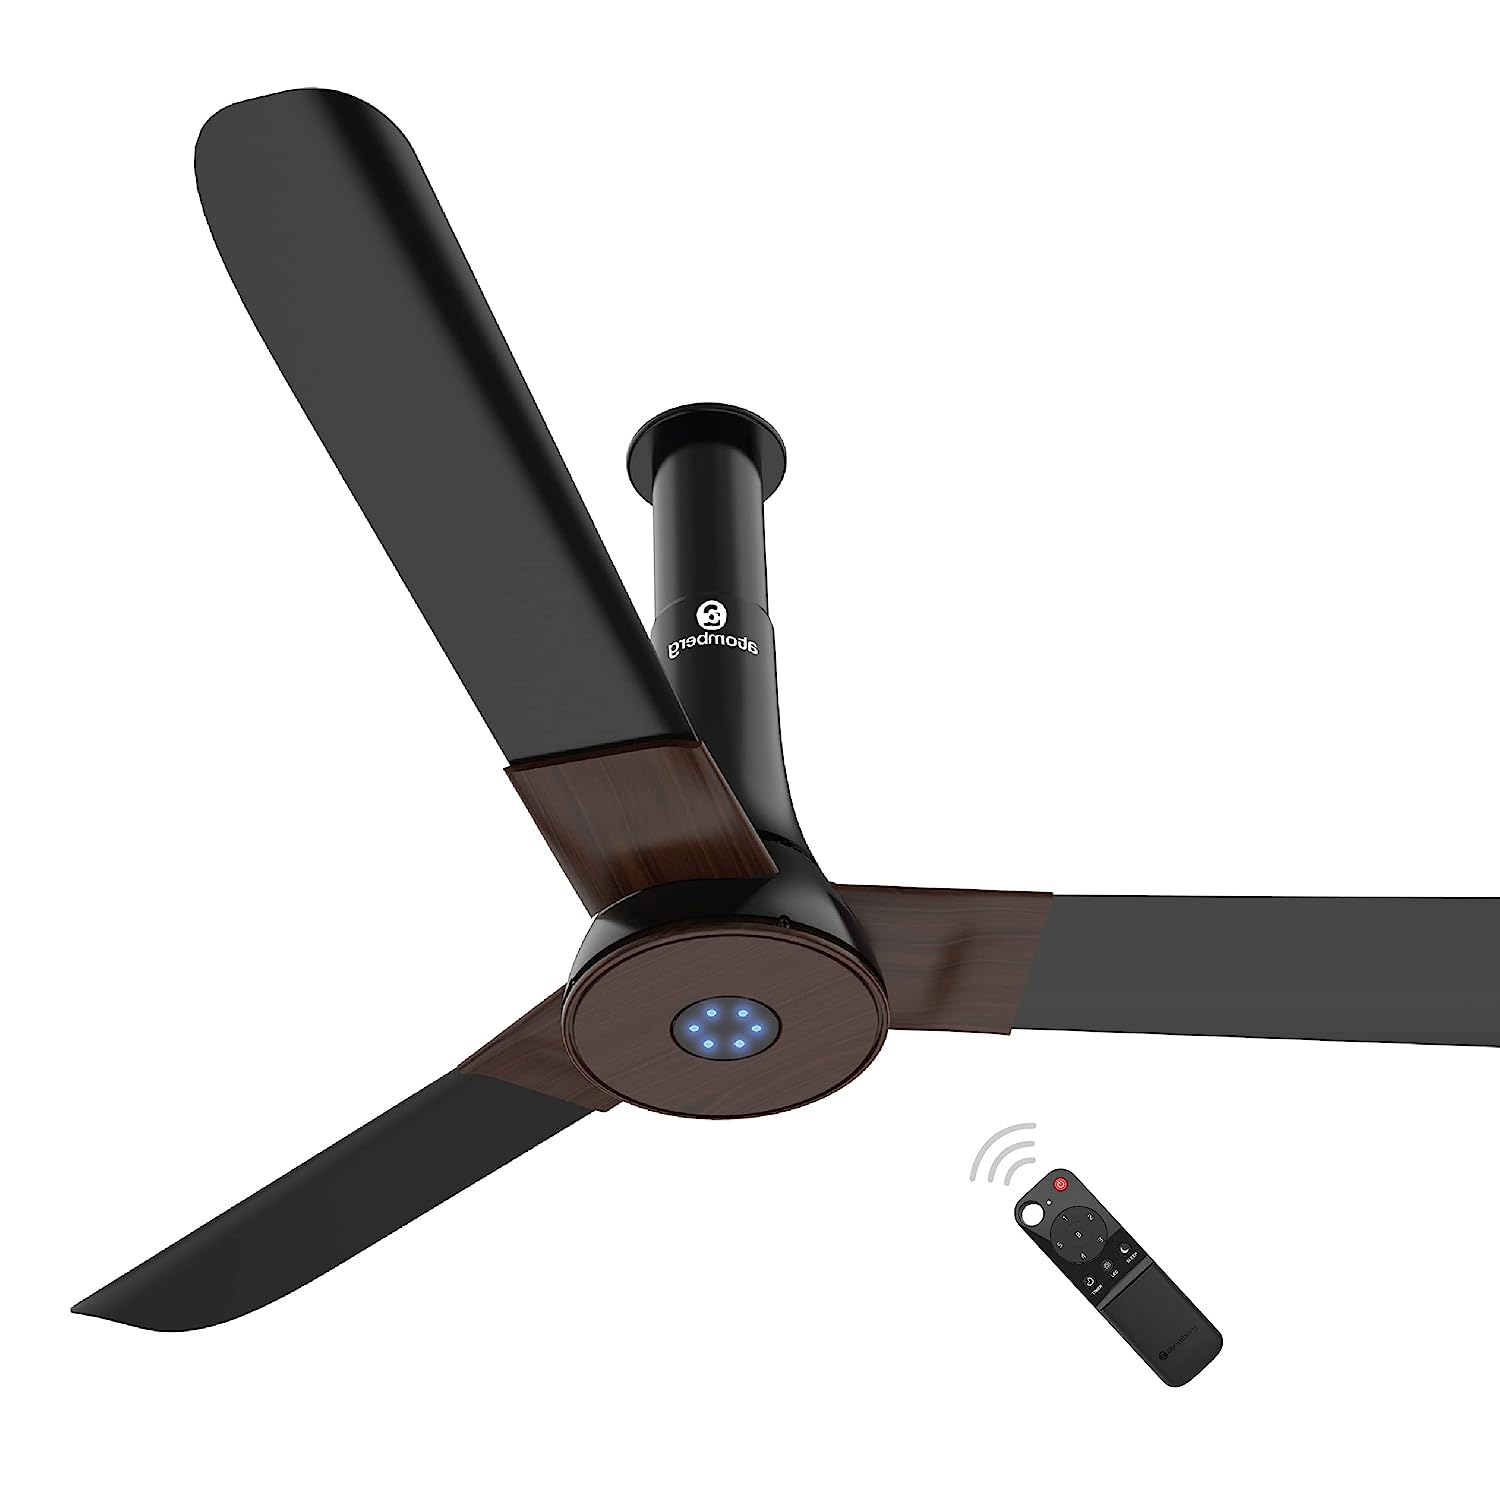 atomberg Studio+ 1200mm BLDC Motor 5 Star Rated Ceiling Fans for Home with Remote Control Upto 65% Energy Saving High Speed Fan with LED Lights 2+1 Year Warranty (Earth Brown)